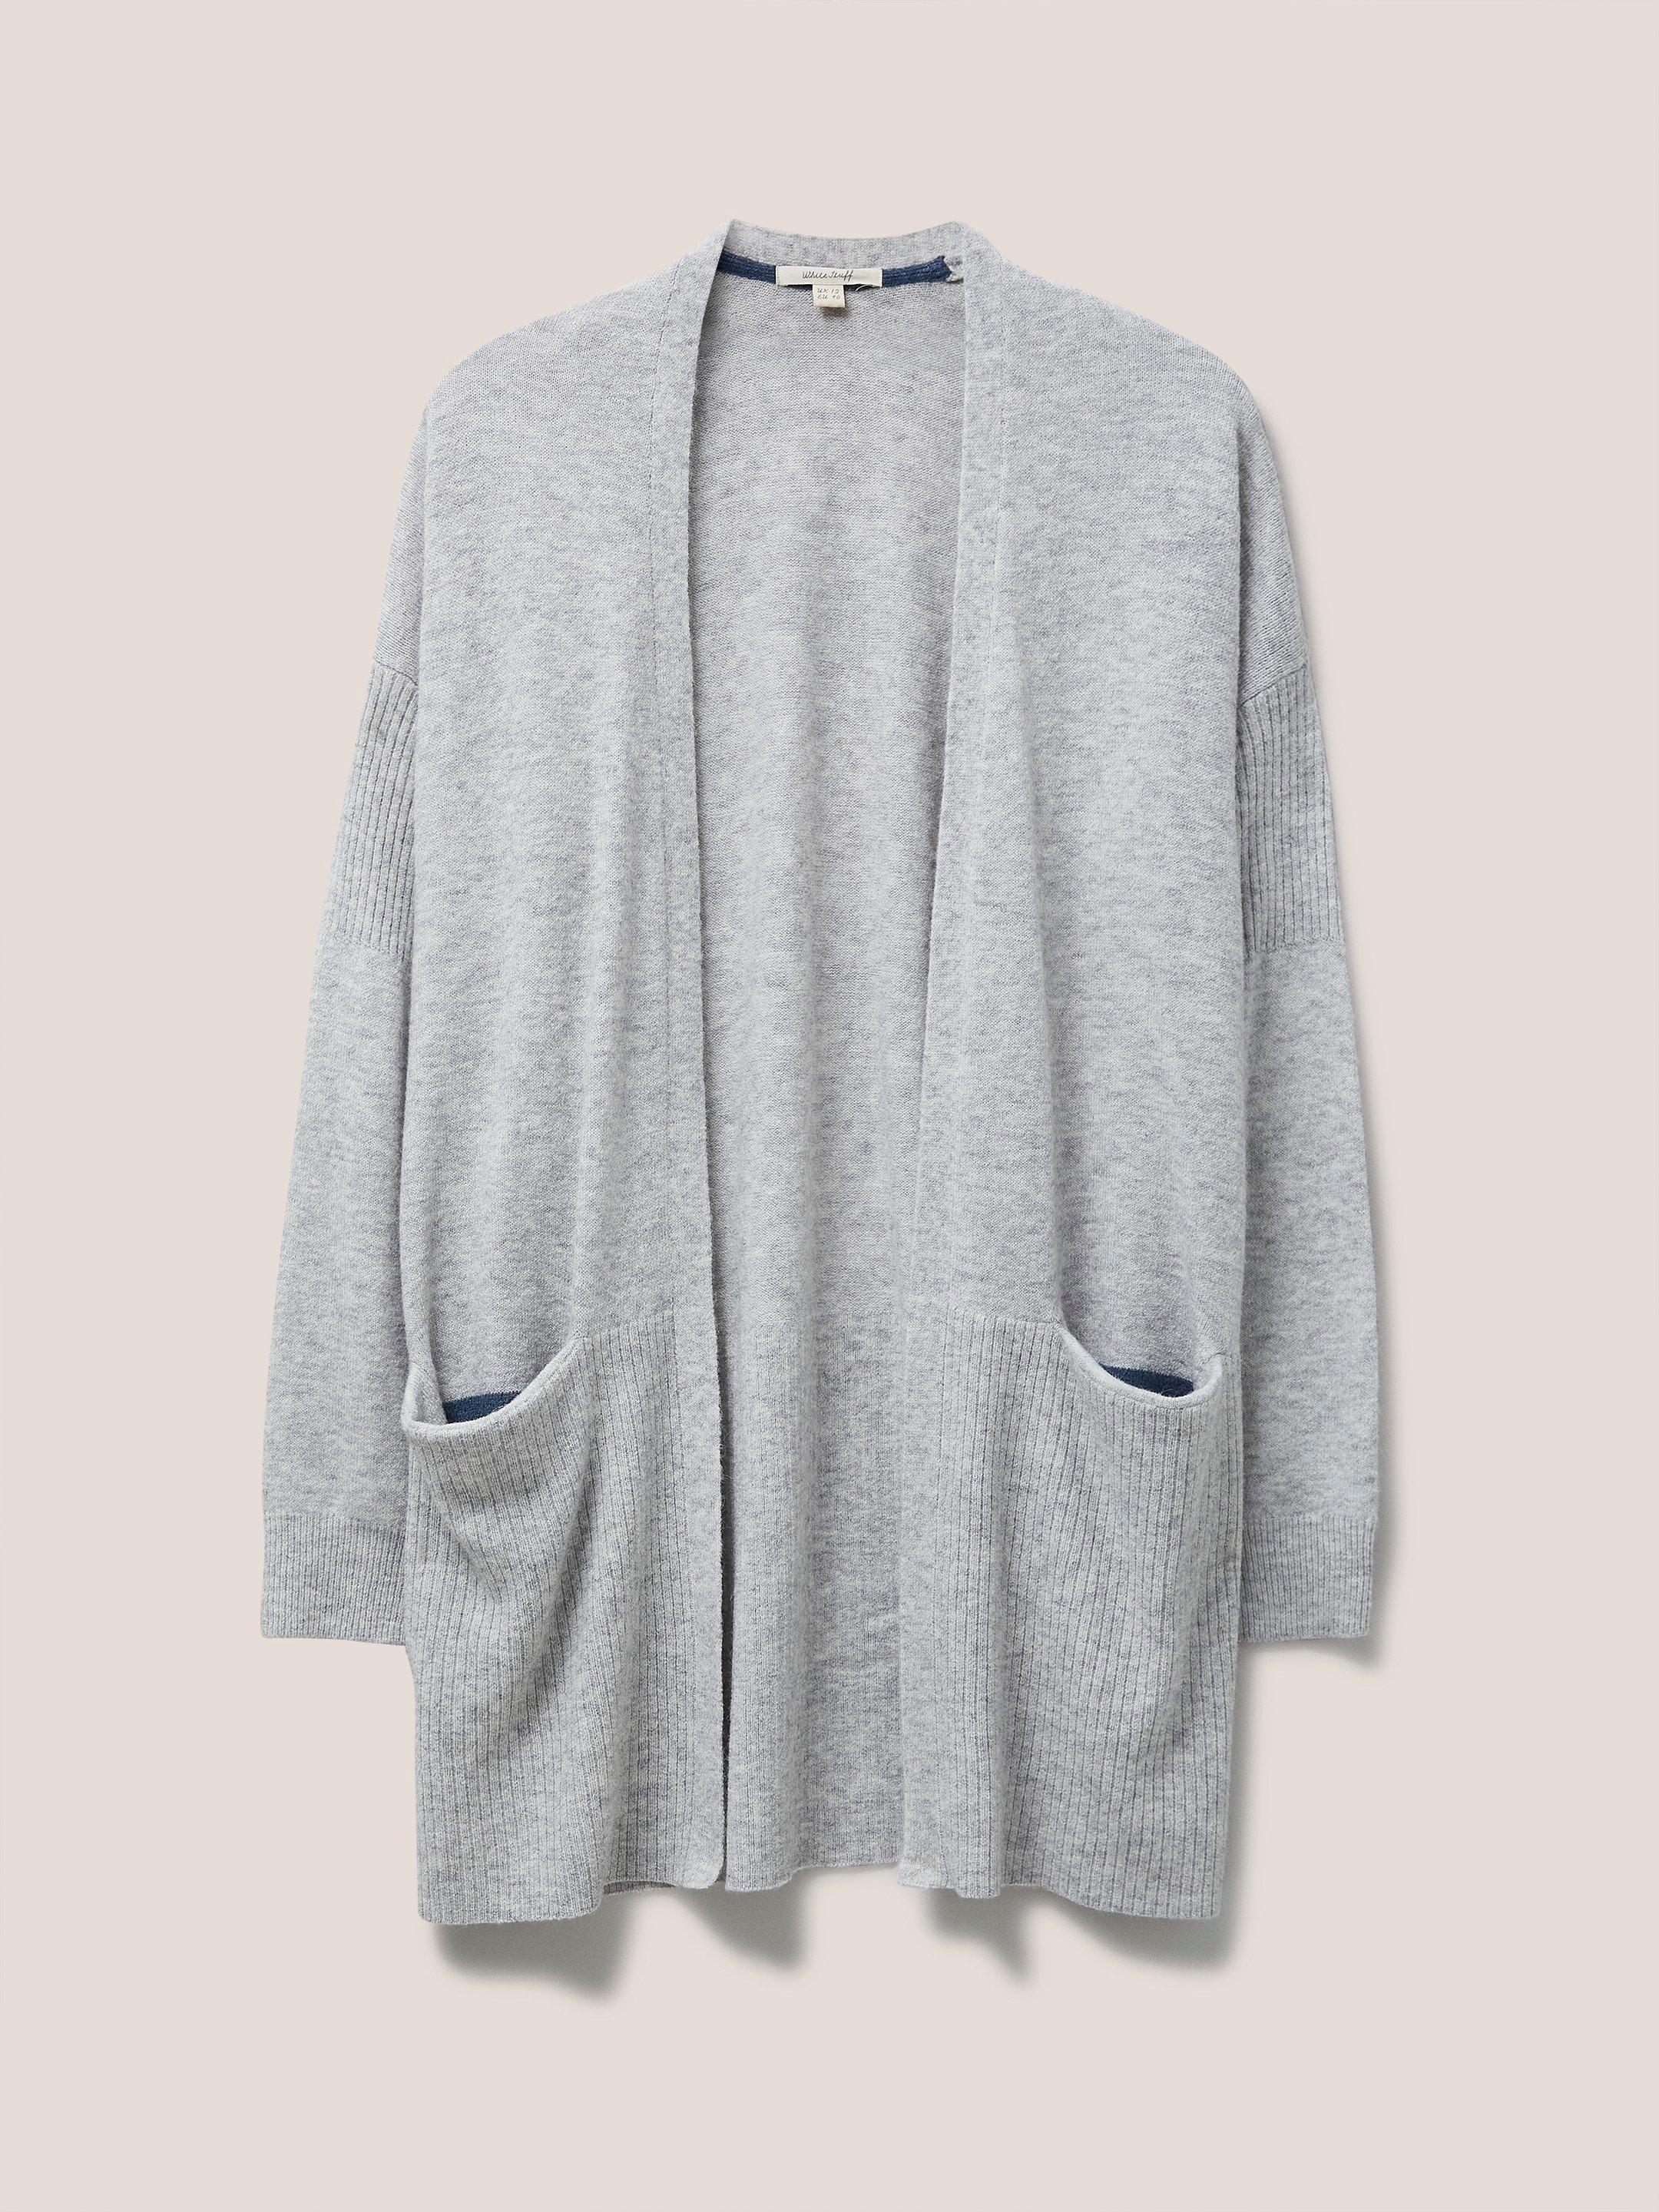 Cosy Cardi in LGT GREY - FLAT FRONT